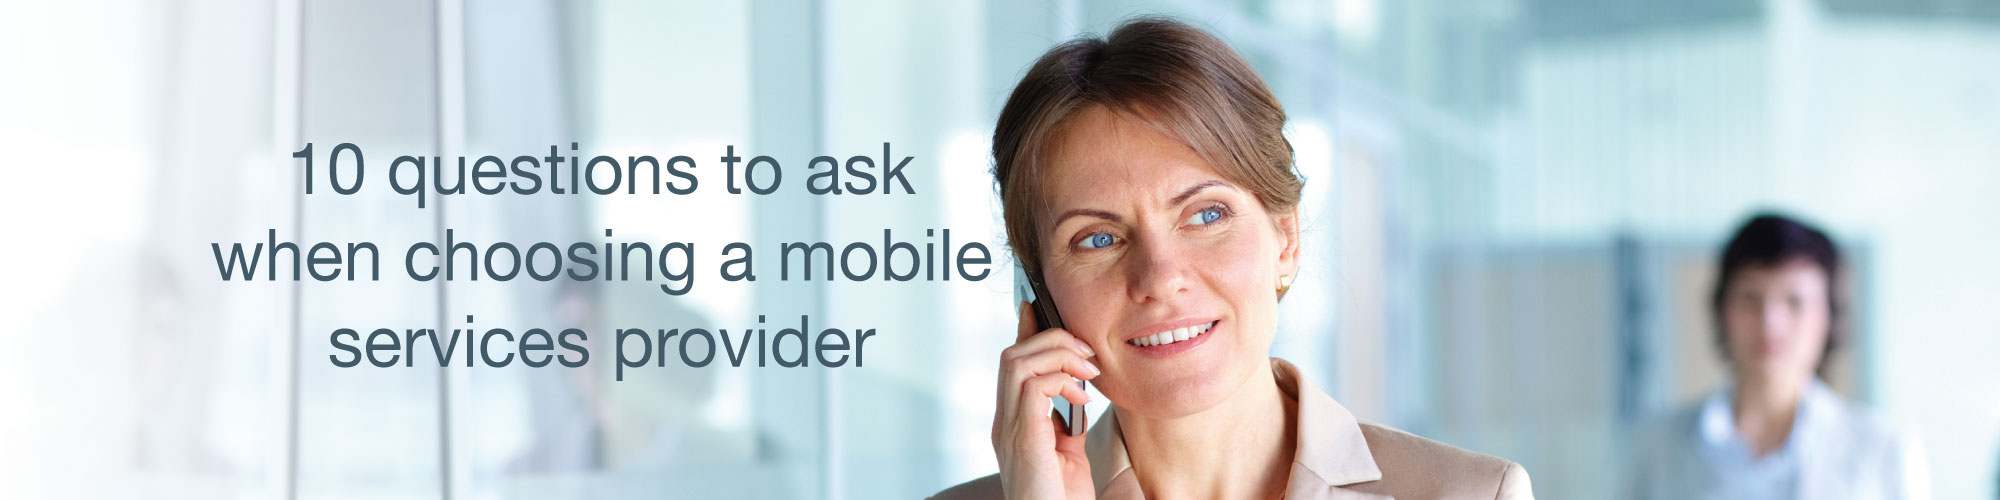 10-Mobile-Questions-Header